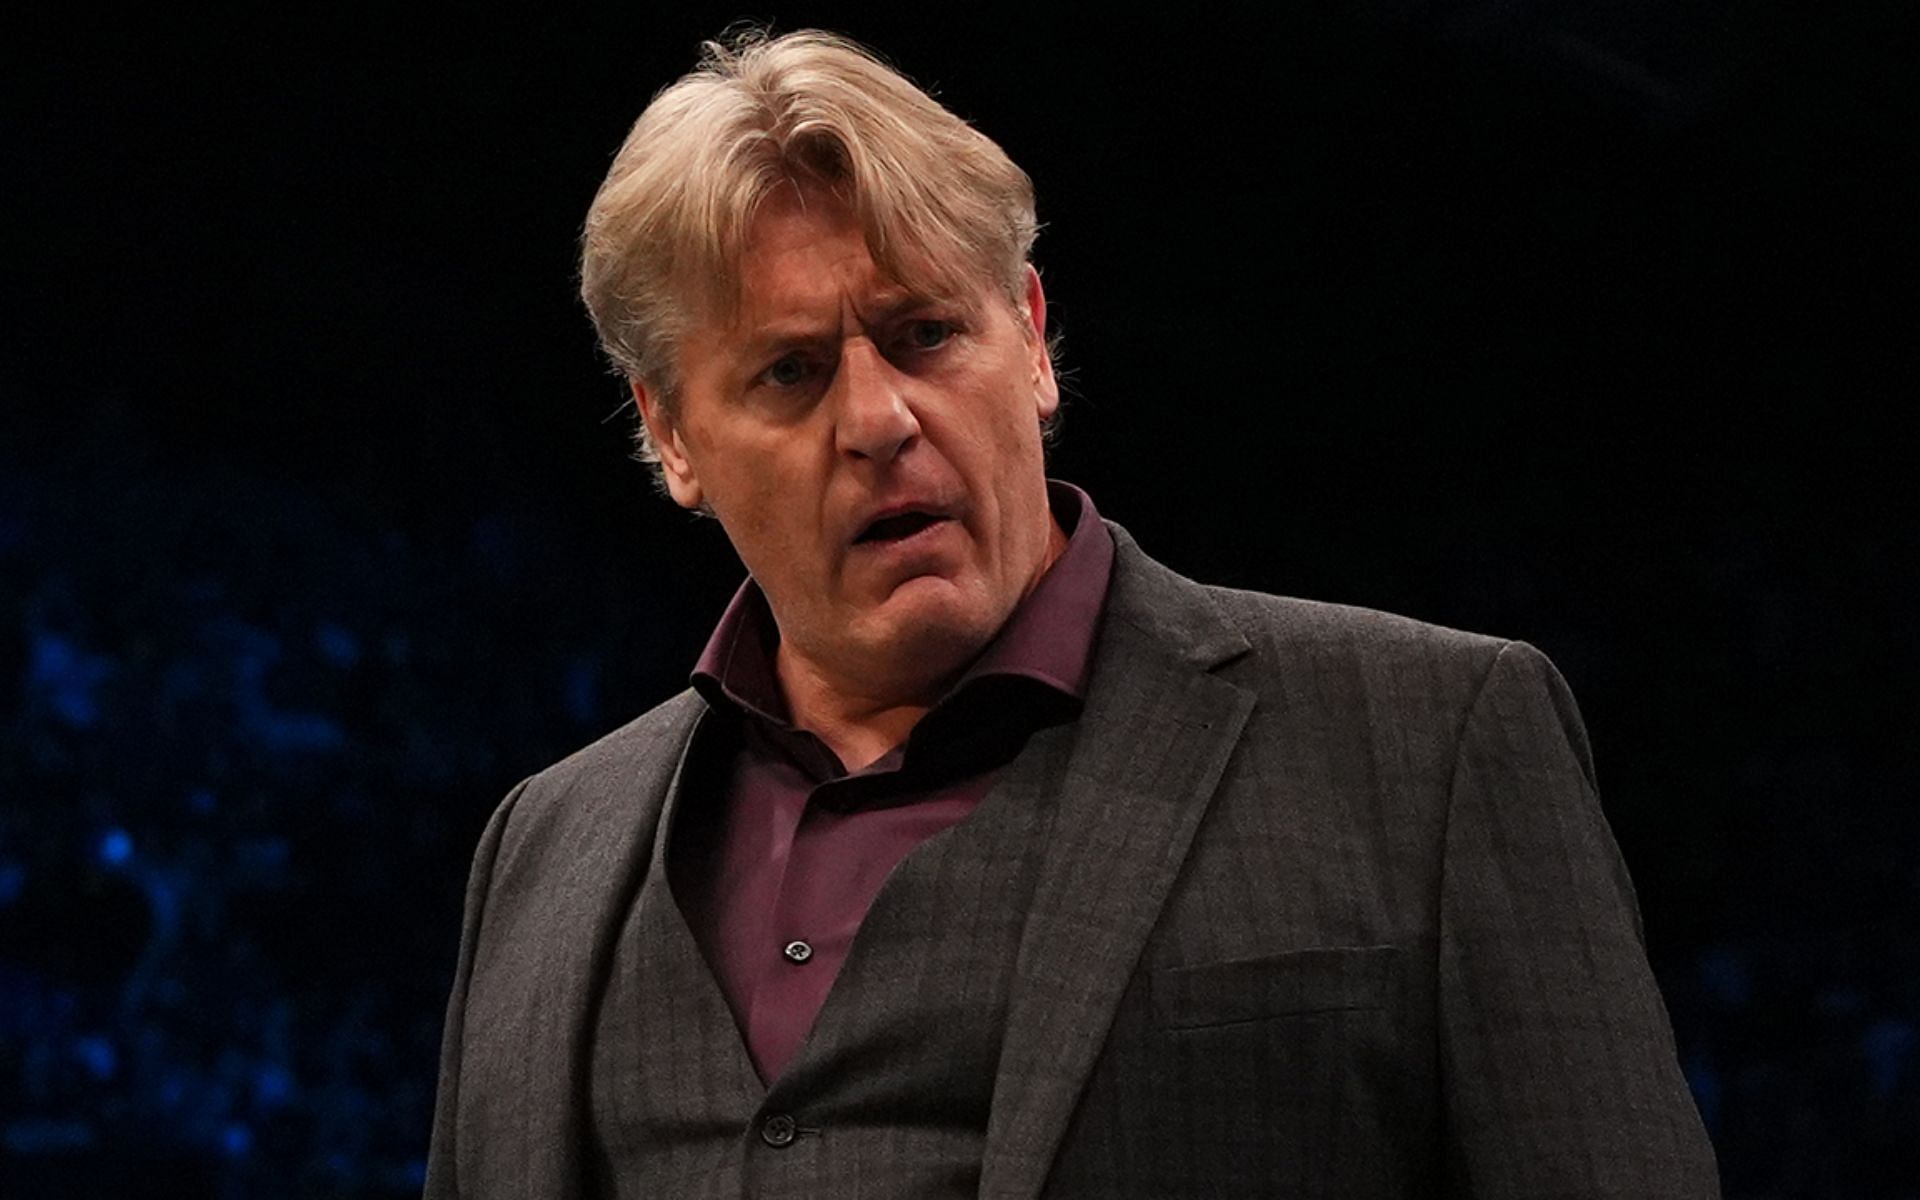 William Regal is the manager of Blackpool Combat Club.